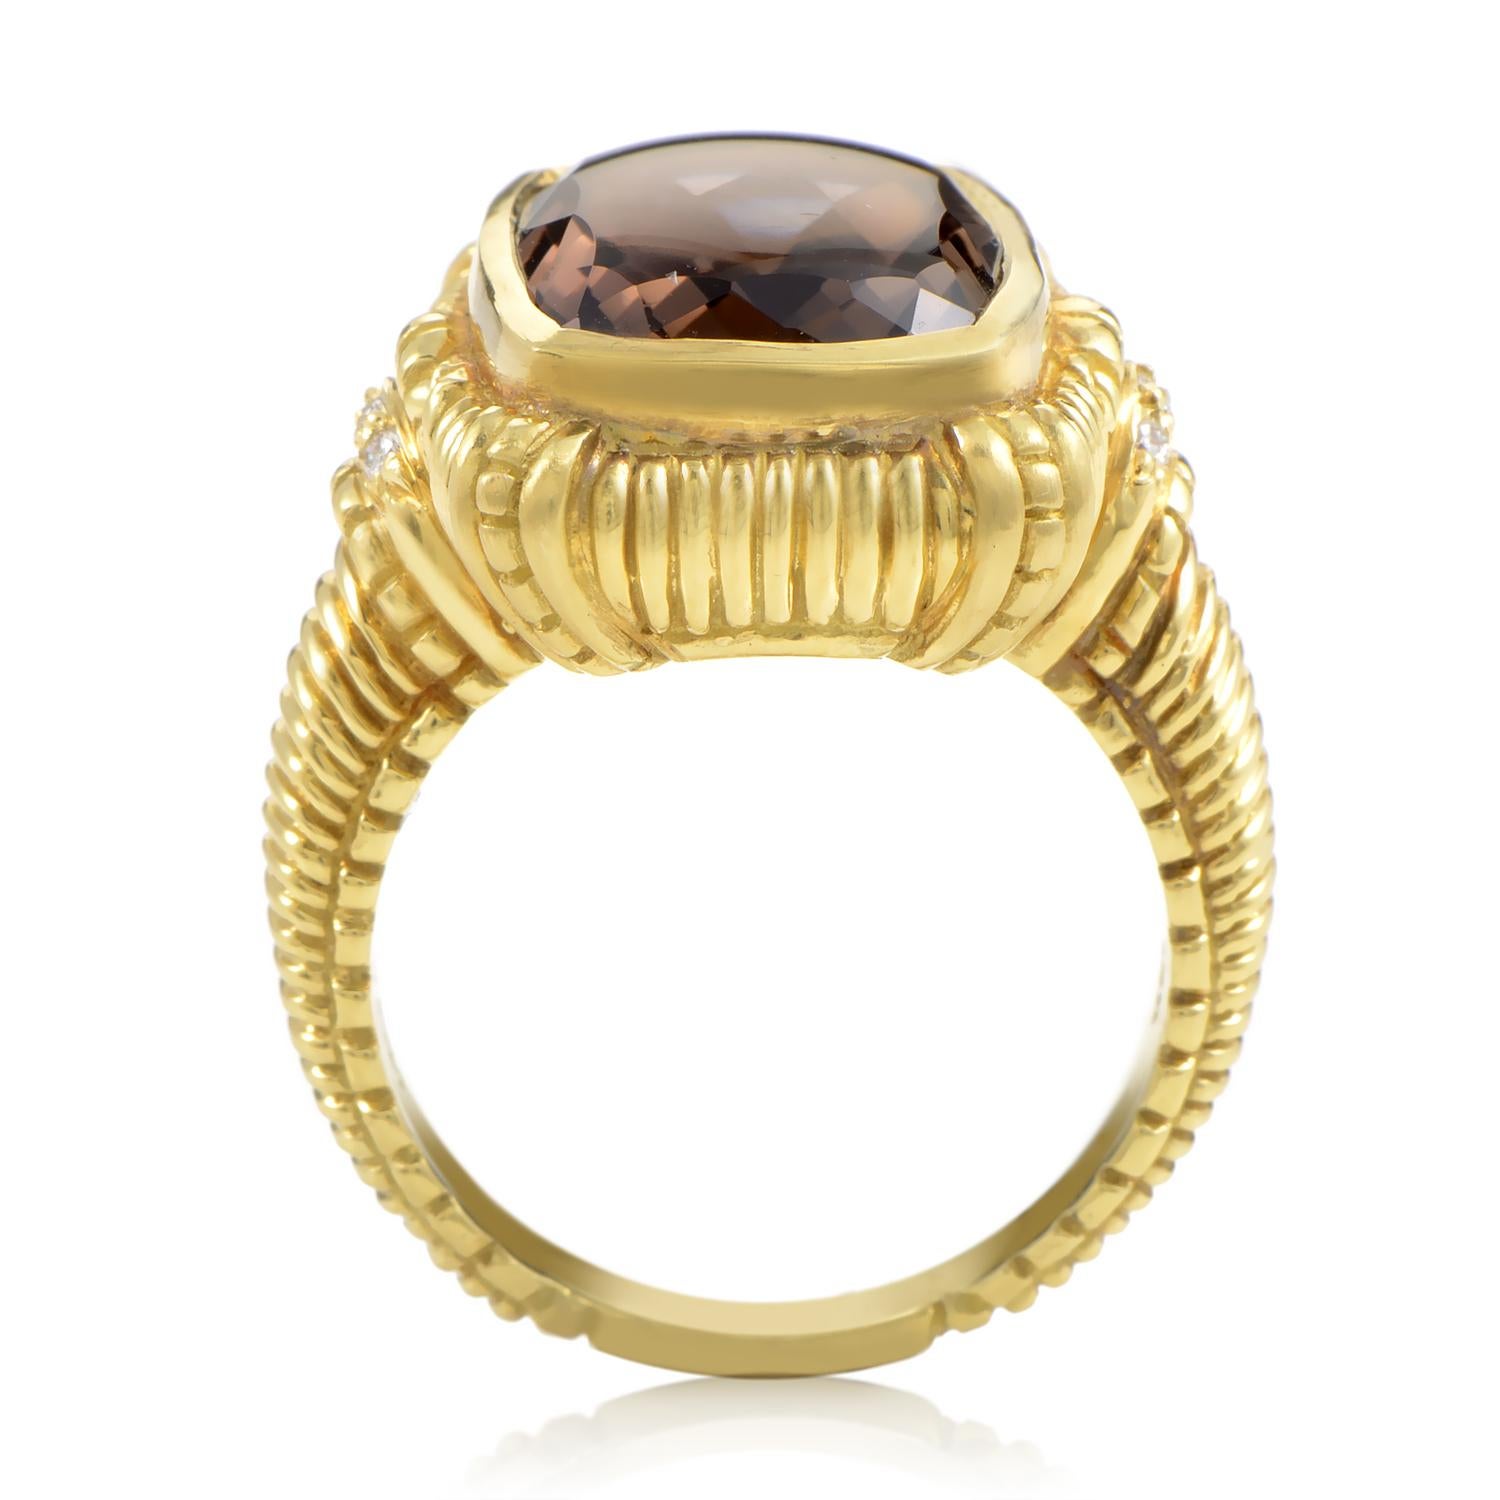 Commanding yet sensuous, this Judith Ripka ring is a mysterious yet glamorous piece. A custom faceted smokey topaz graces the 18K yellow gold ring in a matte finish that is styled in a filigree manner. On either side of the topaz are clusters of